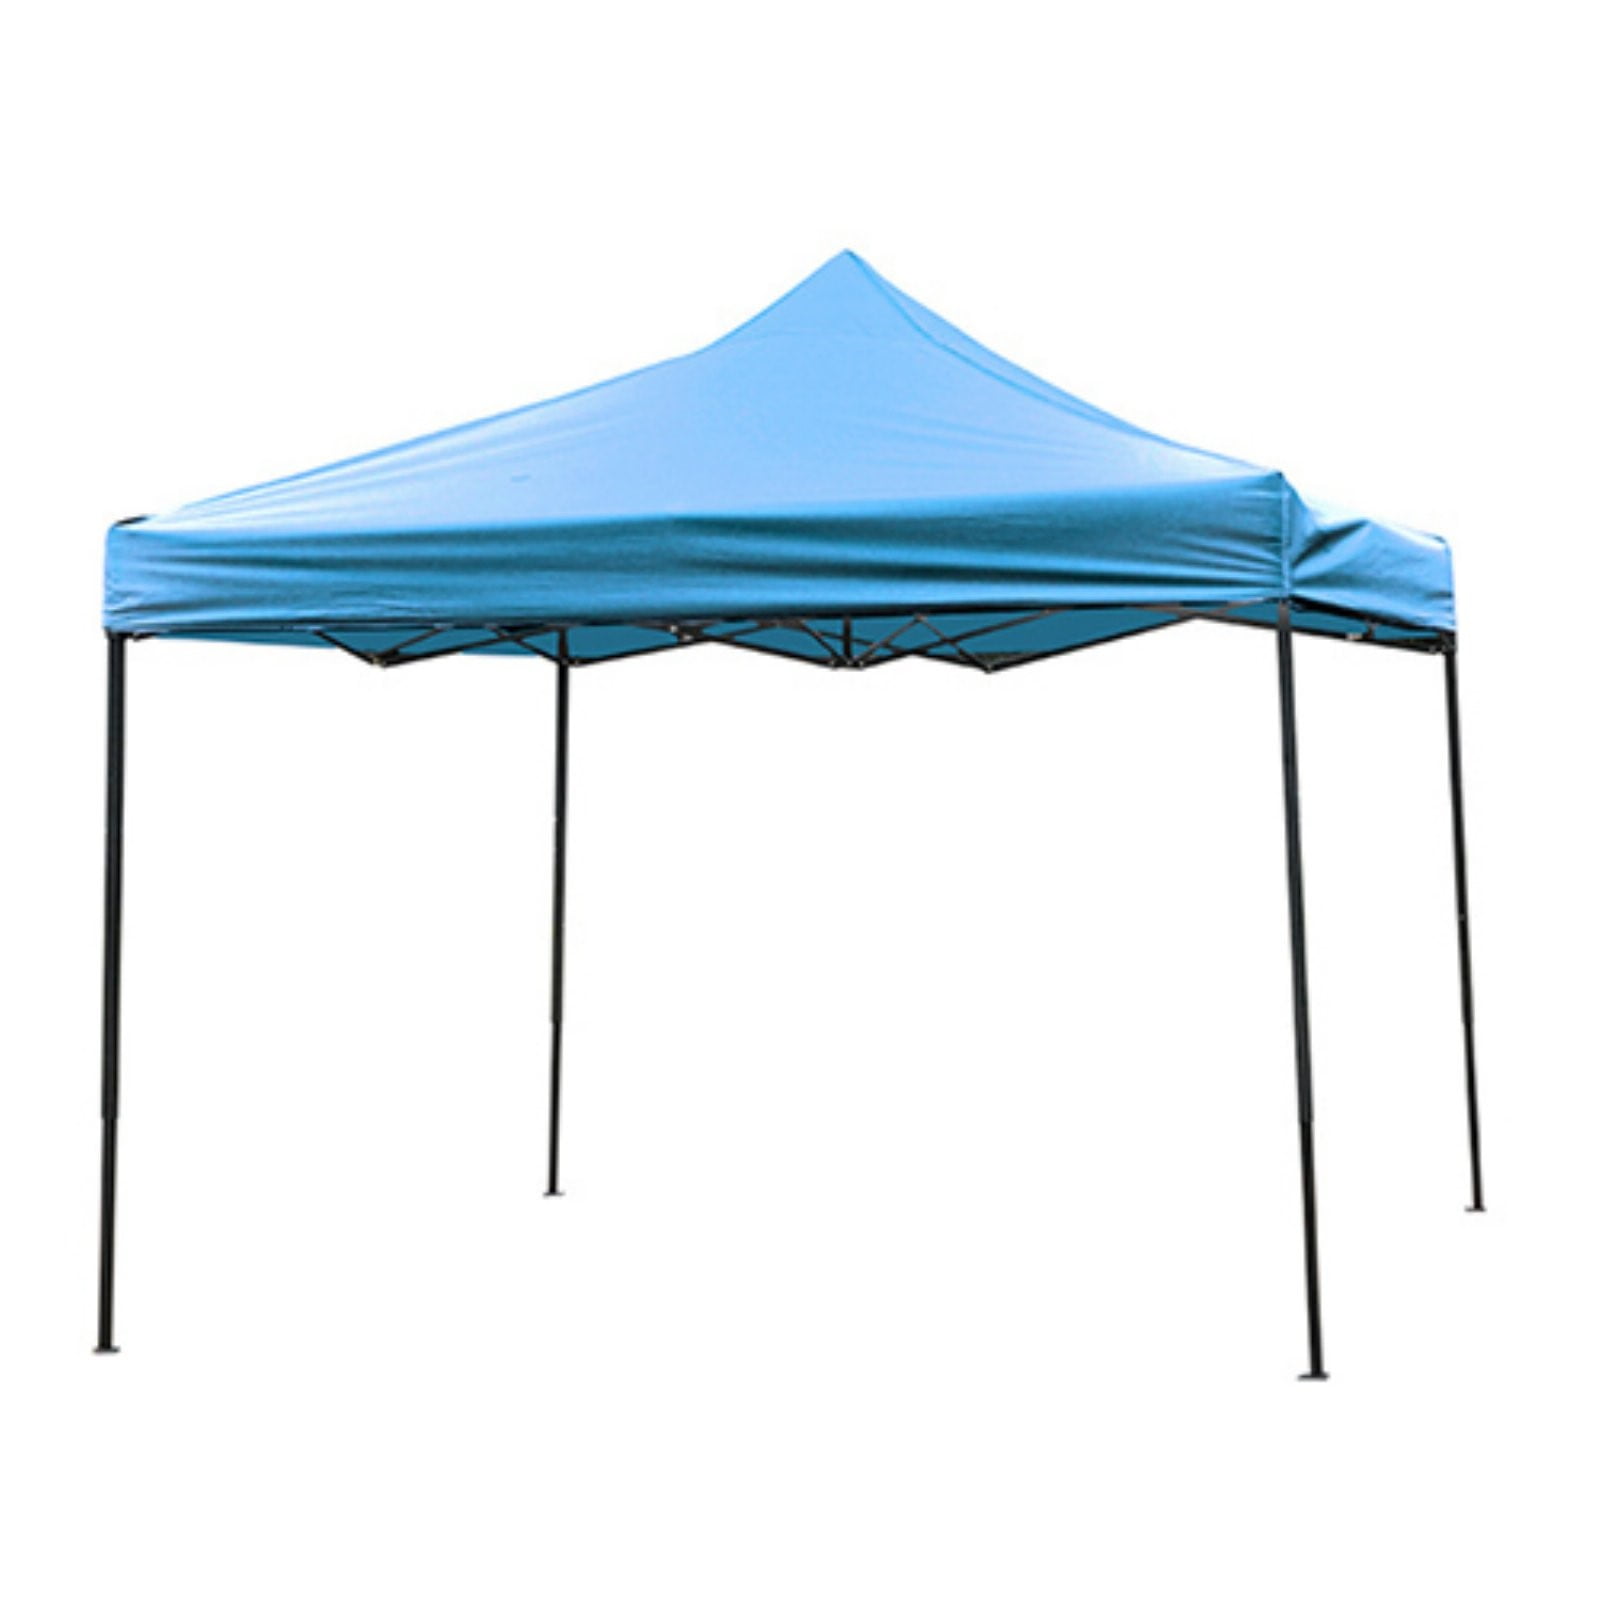 Lightweight and Portable Canopy Tent Set, 10' x 10', by Trademark ...